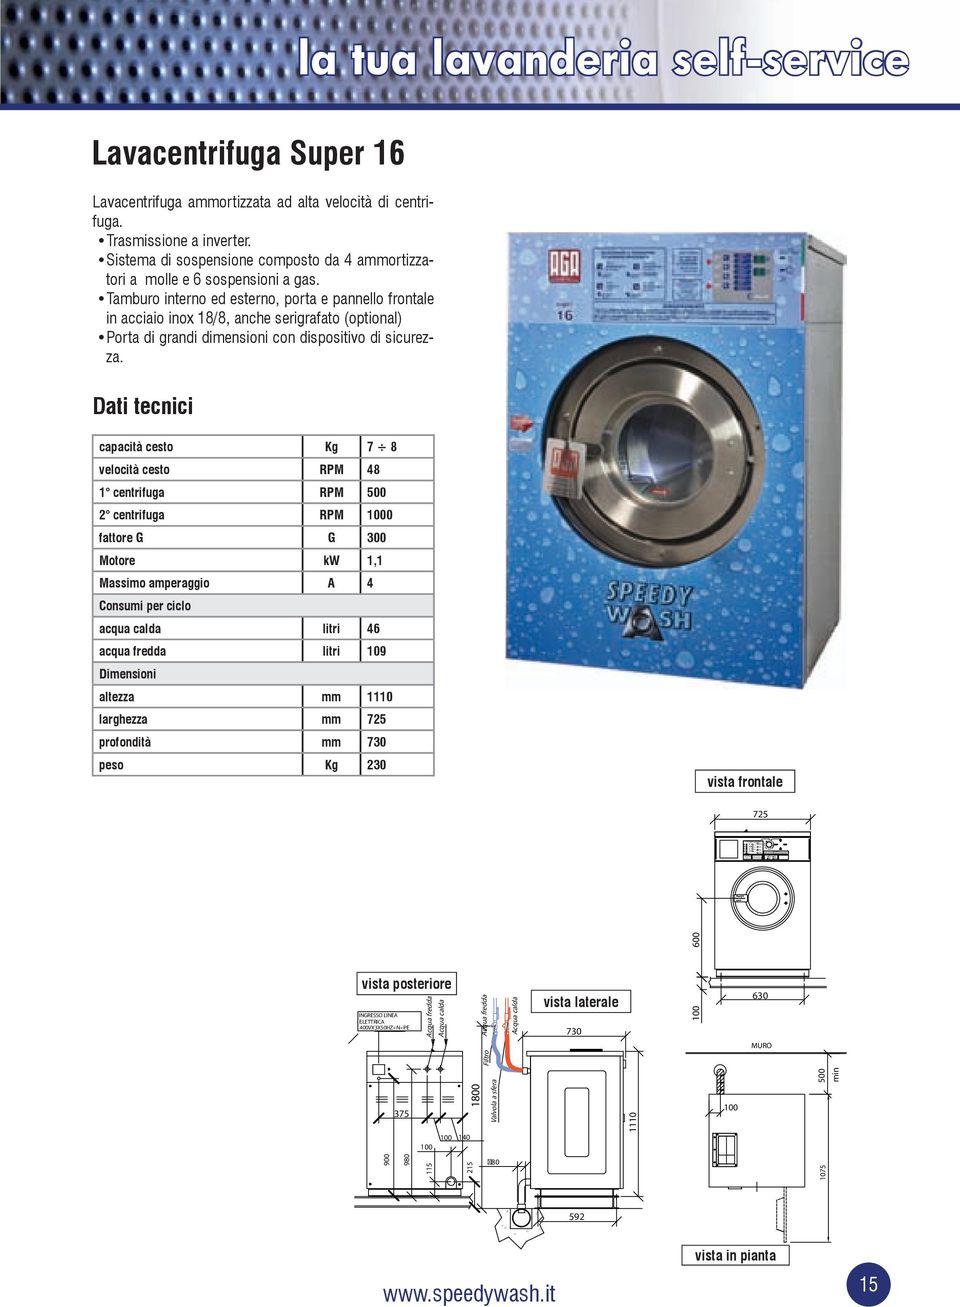 WAIT FOR THE GREEN LIGHT BEFORE OPENING THE DOOR CENTRIFUGA CENTRIFUGA 1000 GIRI 1000 GIRI CENTRIFUGA CENTRIFUGA 500 GIRI 500 GIRI PREWASH PRELAVAGGIO PRELAVAGE WASH LAVAGGIO LAVAGE RINSE RISCIACQUO